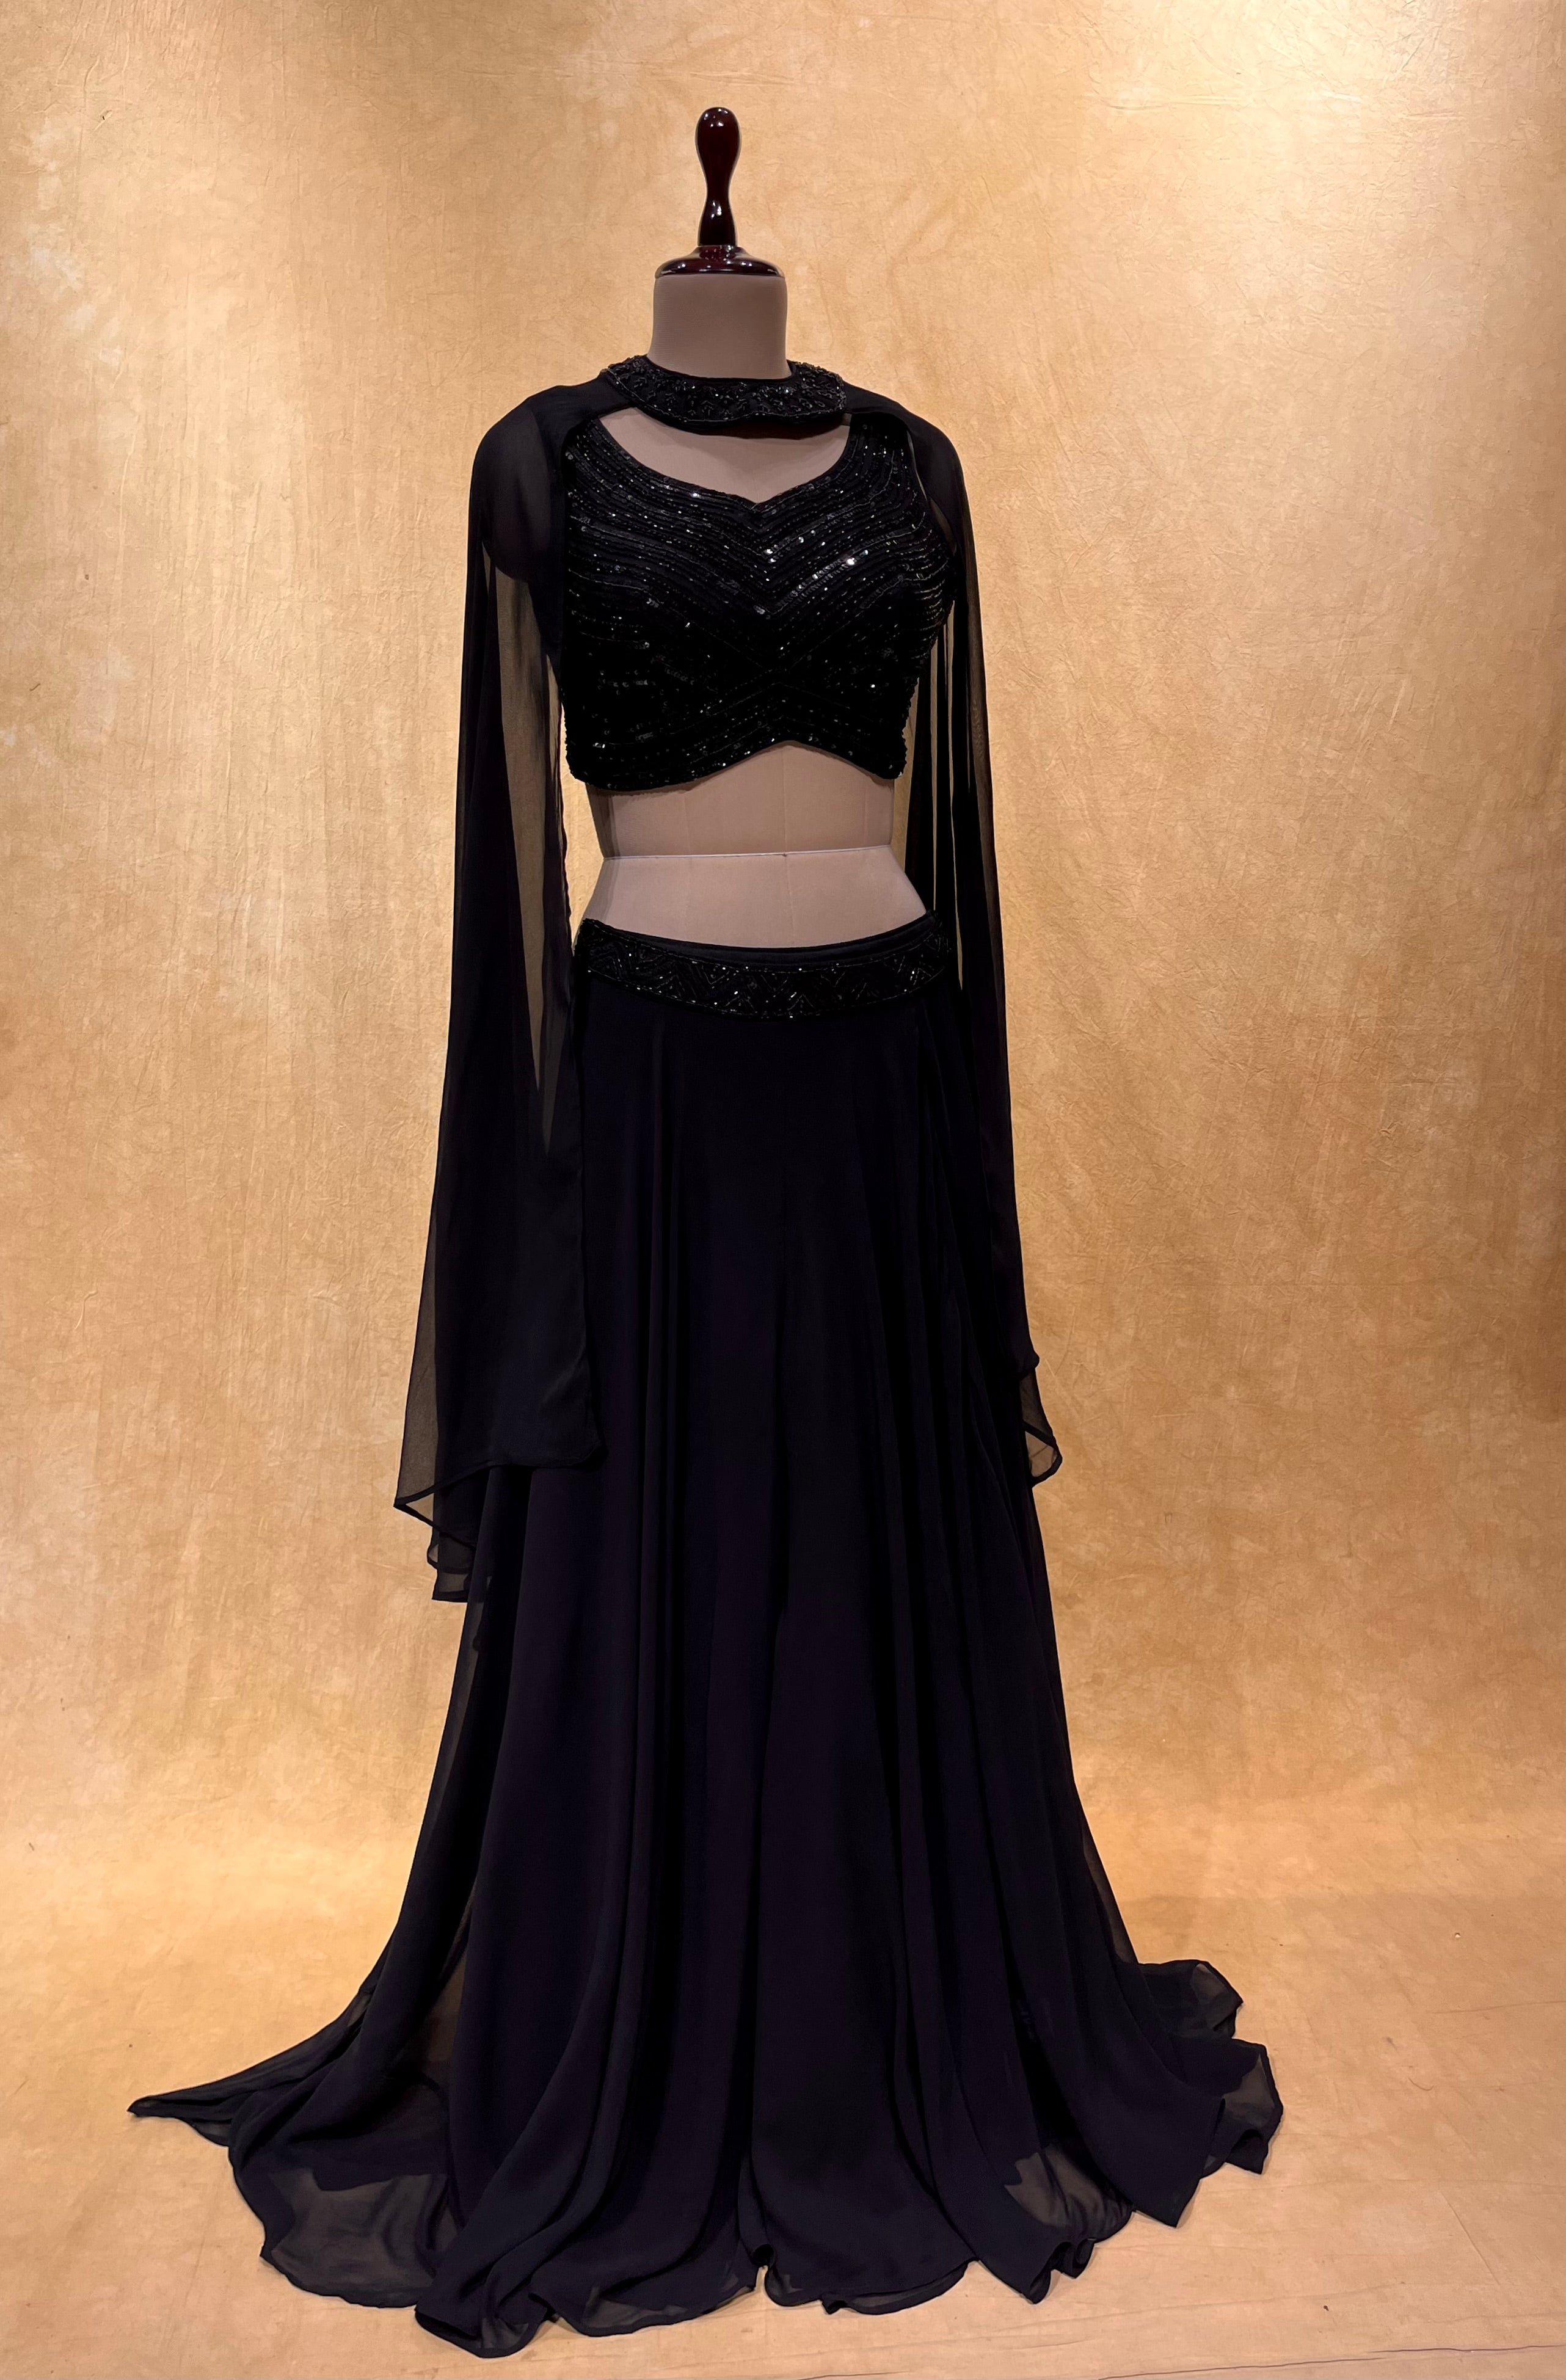 Energetic Black Color Partywear Anarkali gown | Asian bridal wear, Gowns,  Indian wedding dress